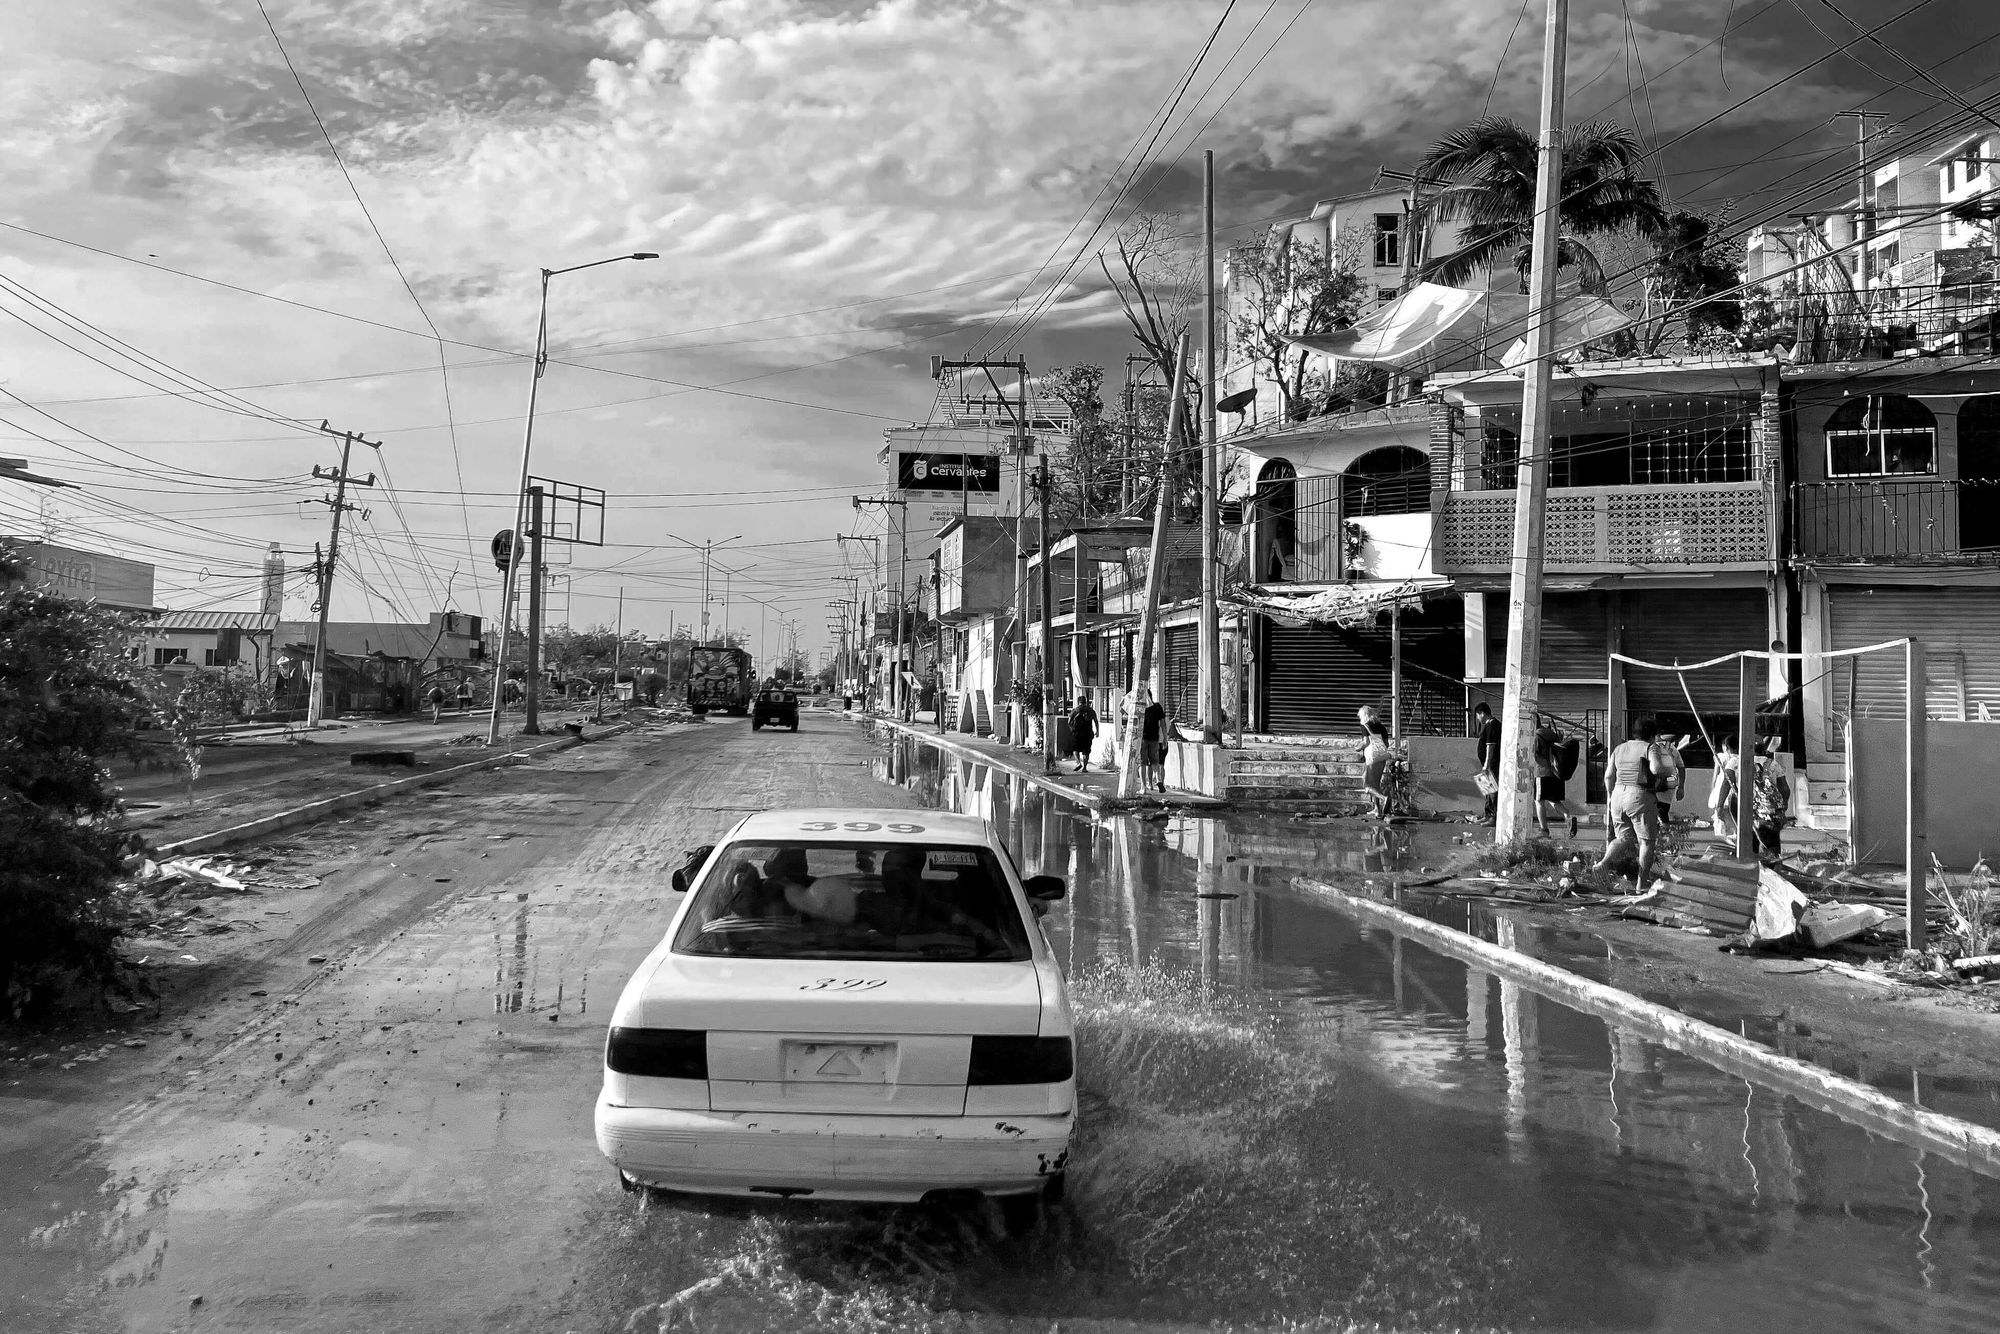 A car is passing through the smashed streets of Acapulco, after it got smashed by the hurricane Otis. 